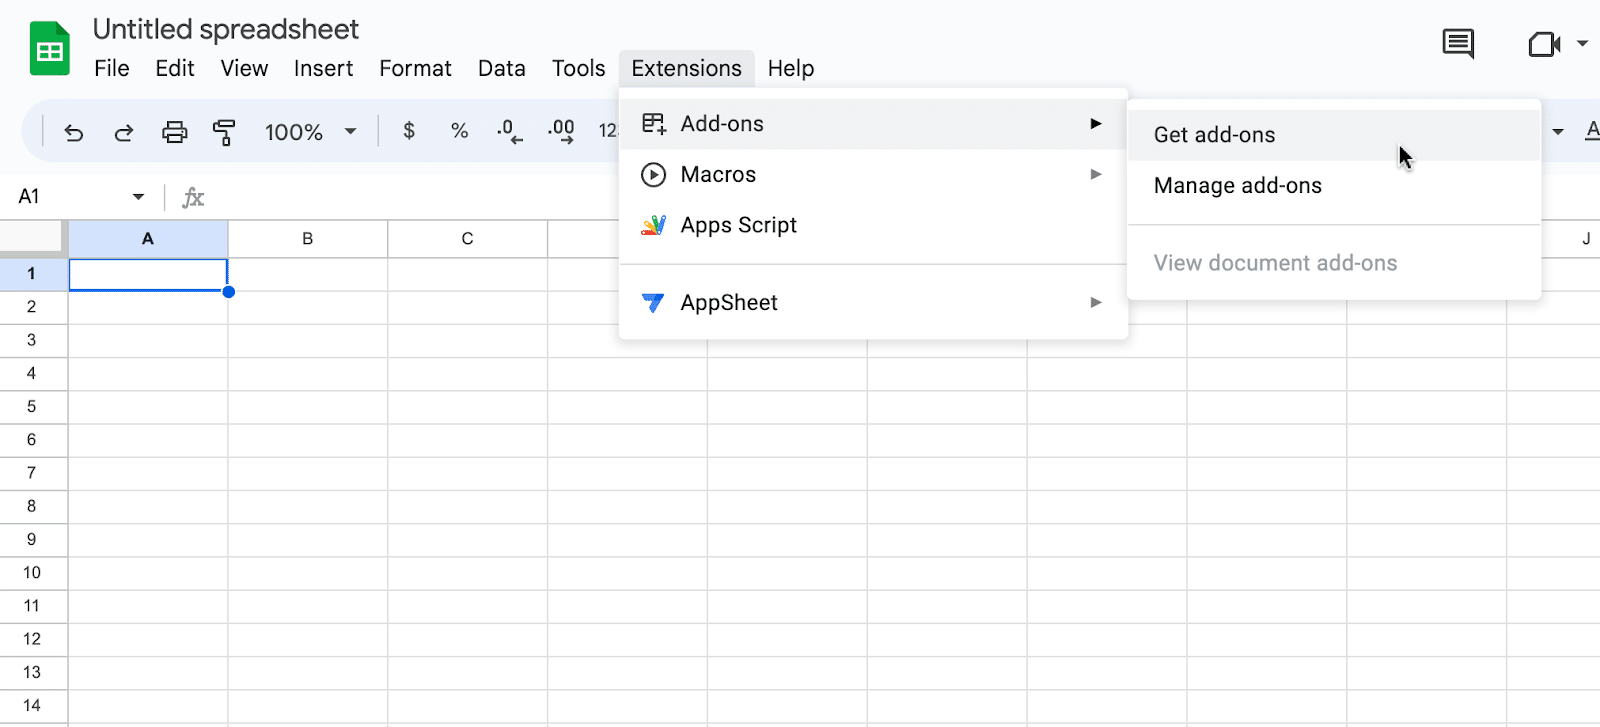 The Google Sheets menu with Extensions > Add-ons > Get add-ons highlighted. 